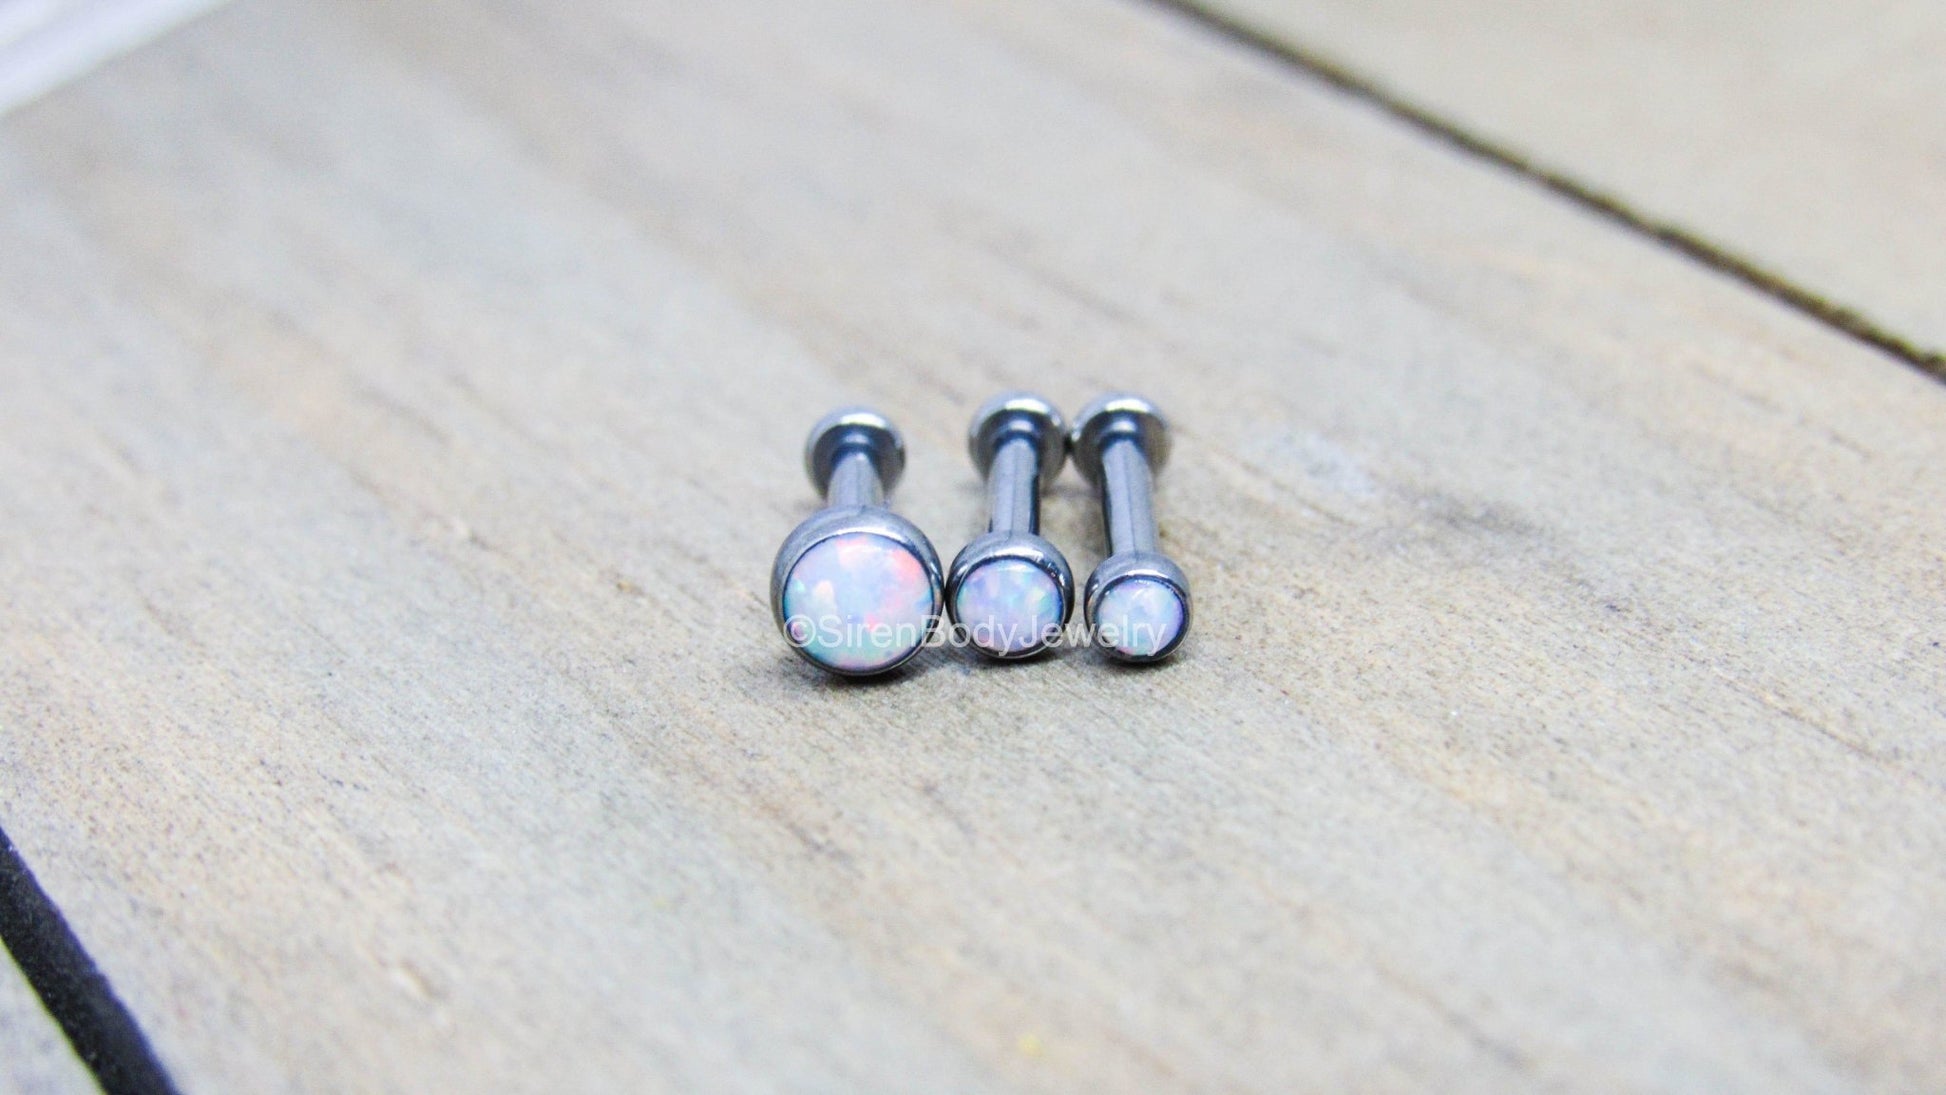 16g White opal titanium flat back labret set of 3 triple forward helix cartilage earrings hypoallergenic 1/4"-5/16" pick your anodized color - SirenBodyJewelry